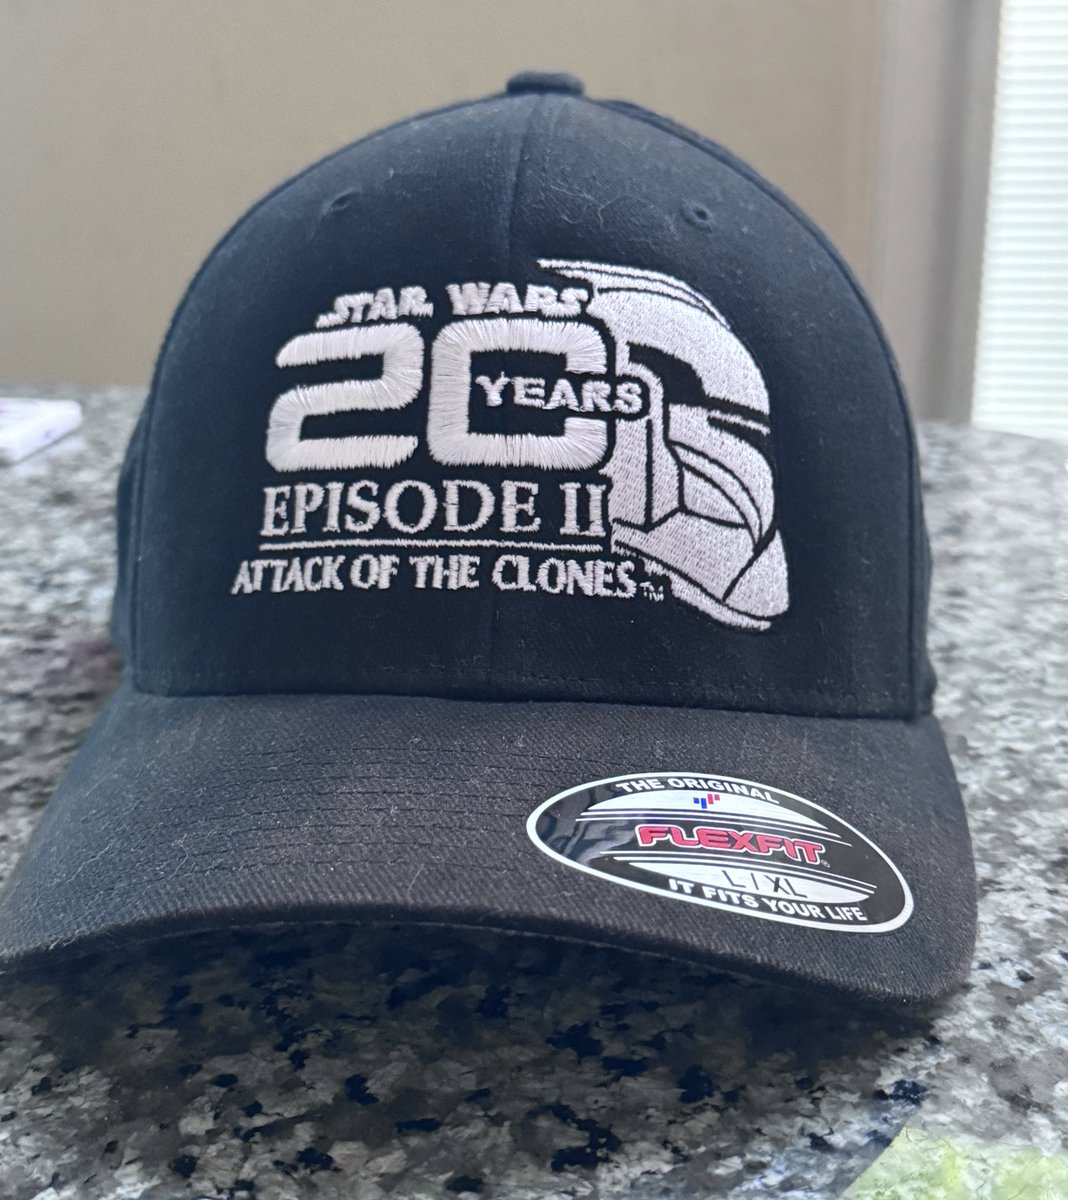 In honor of #AttackOfTheClones 22nd Anniversary, here’s a hat I got 2 years ago from Star Wars Celebration Anaheim 2022.